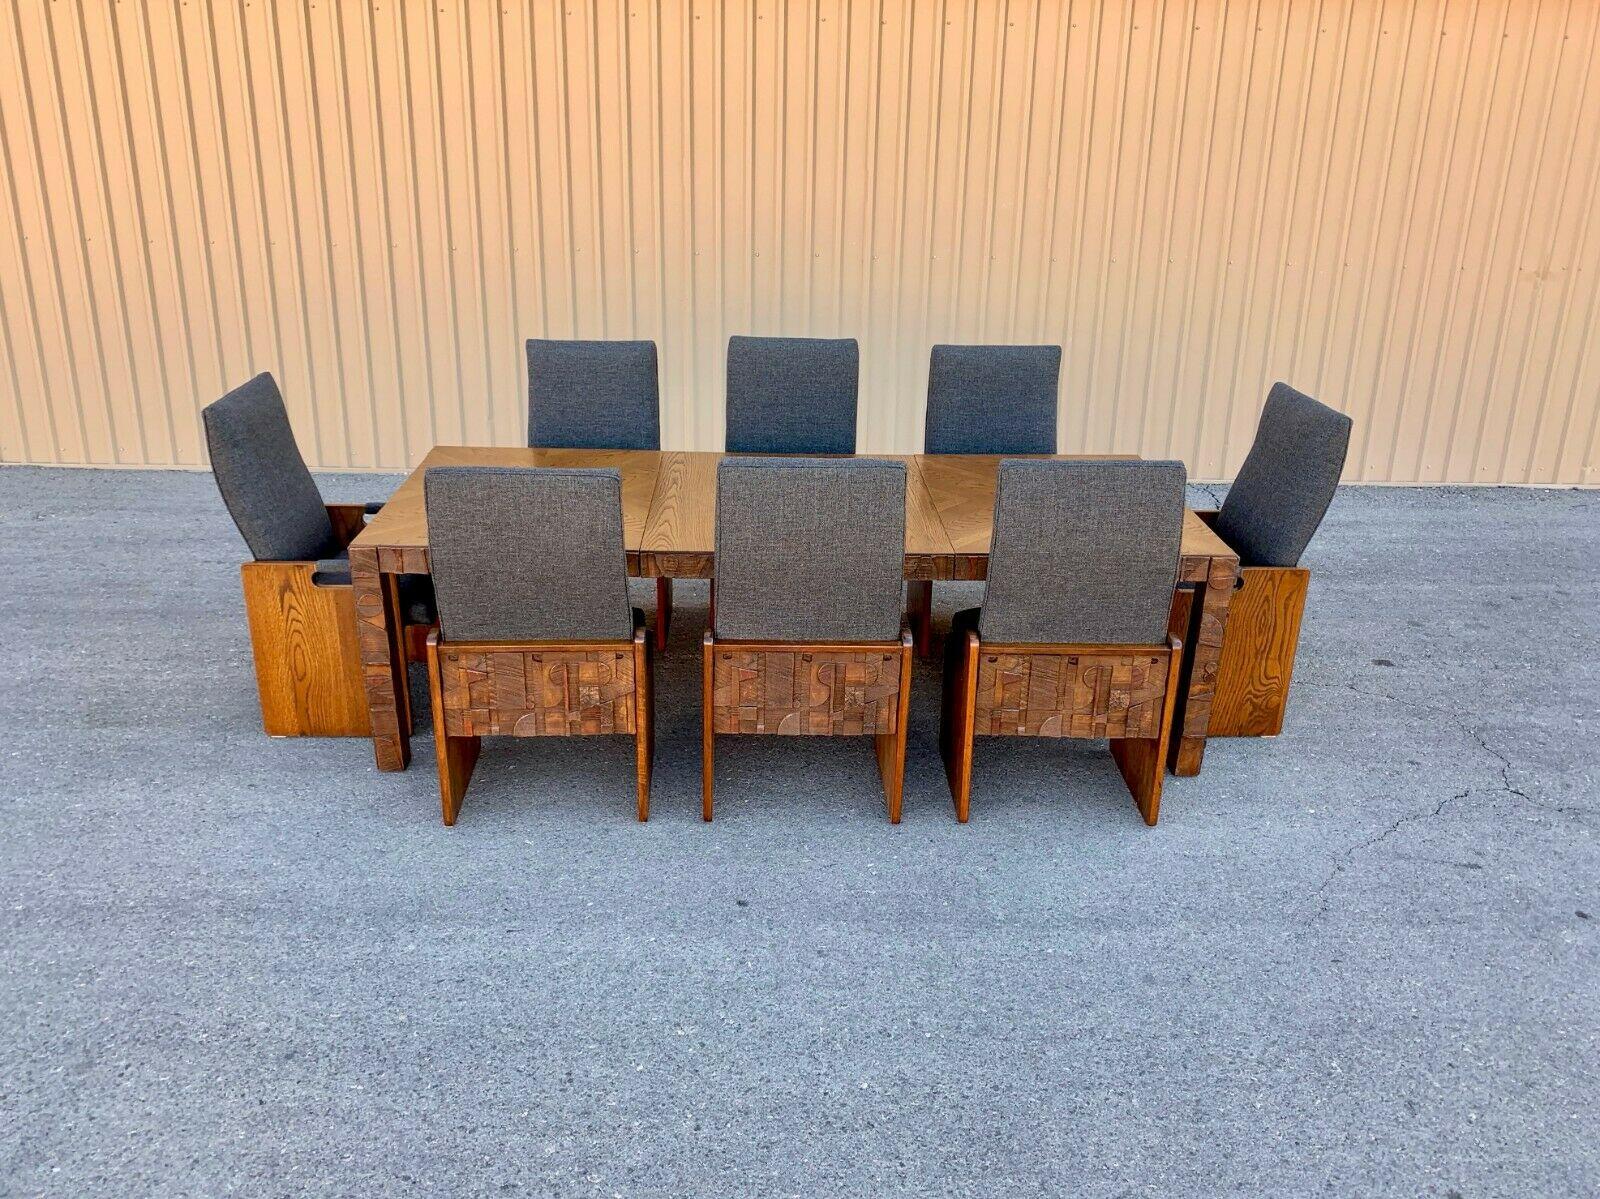 This Mid Century Modern dining room set, in the manner of Paul Evans, is LANES ode to the brutalist period/style. This is a great example of “Brutalist” mid century modern architecture & design. The set is Professionally refinished And